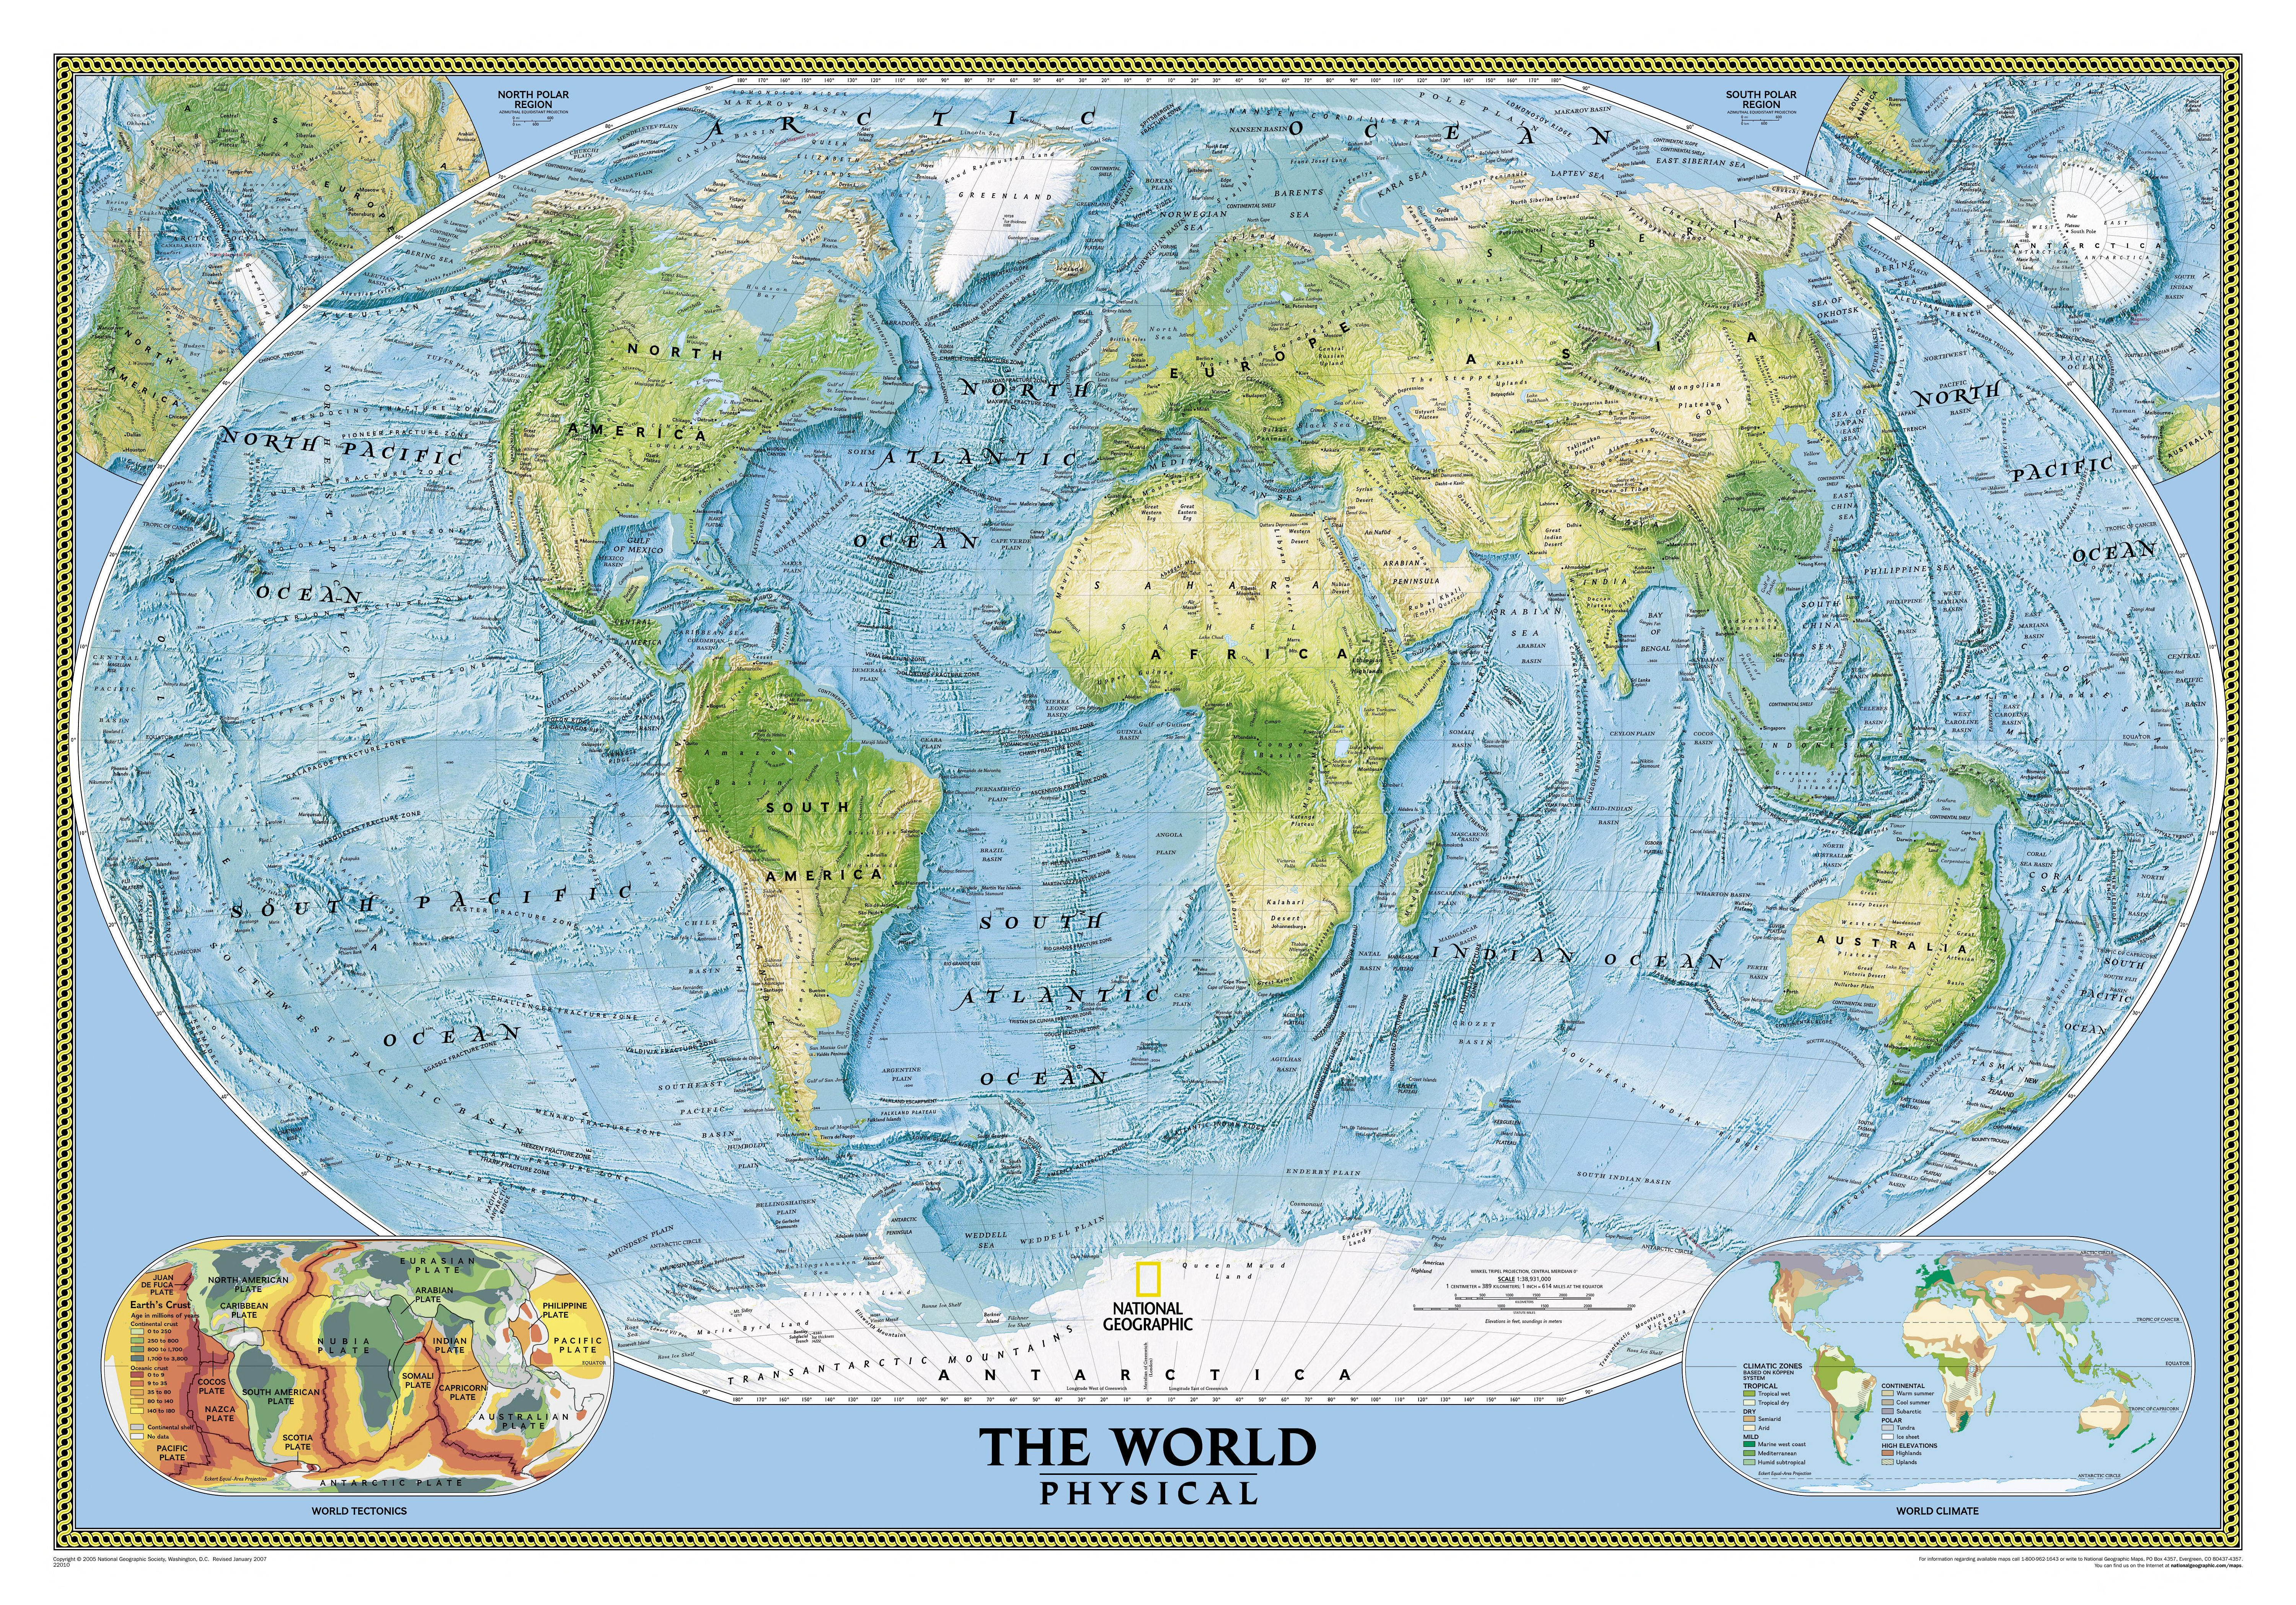 MAPS - National Geographic - World Map - Physical 2005.jpg